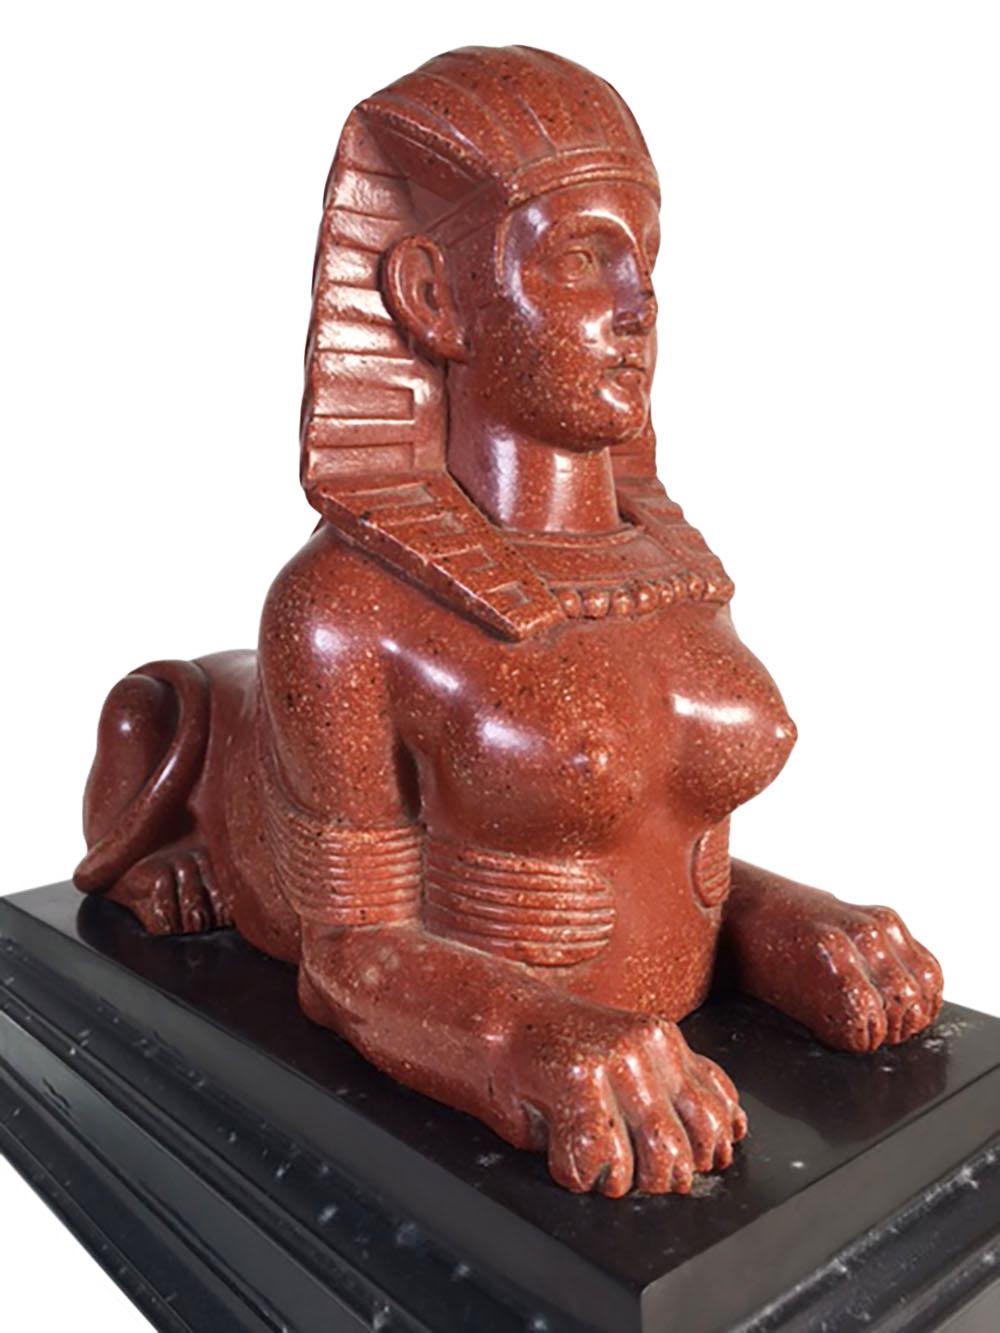 A late 18th century grand tour era Egyptian marble sphinx. Sphinx is sitting on attached black marble base.